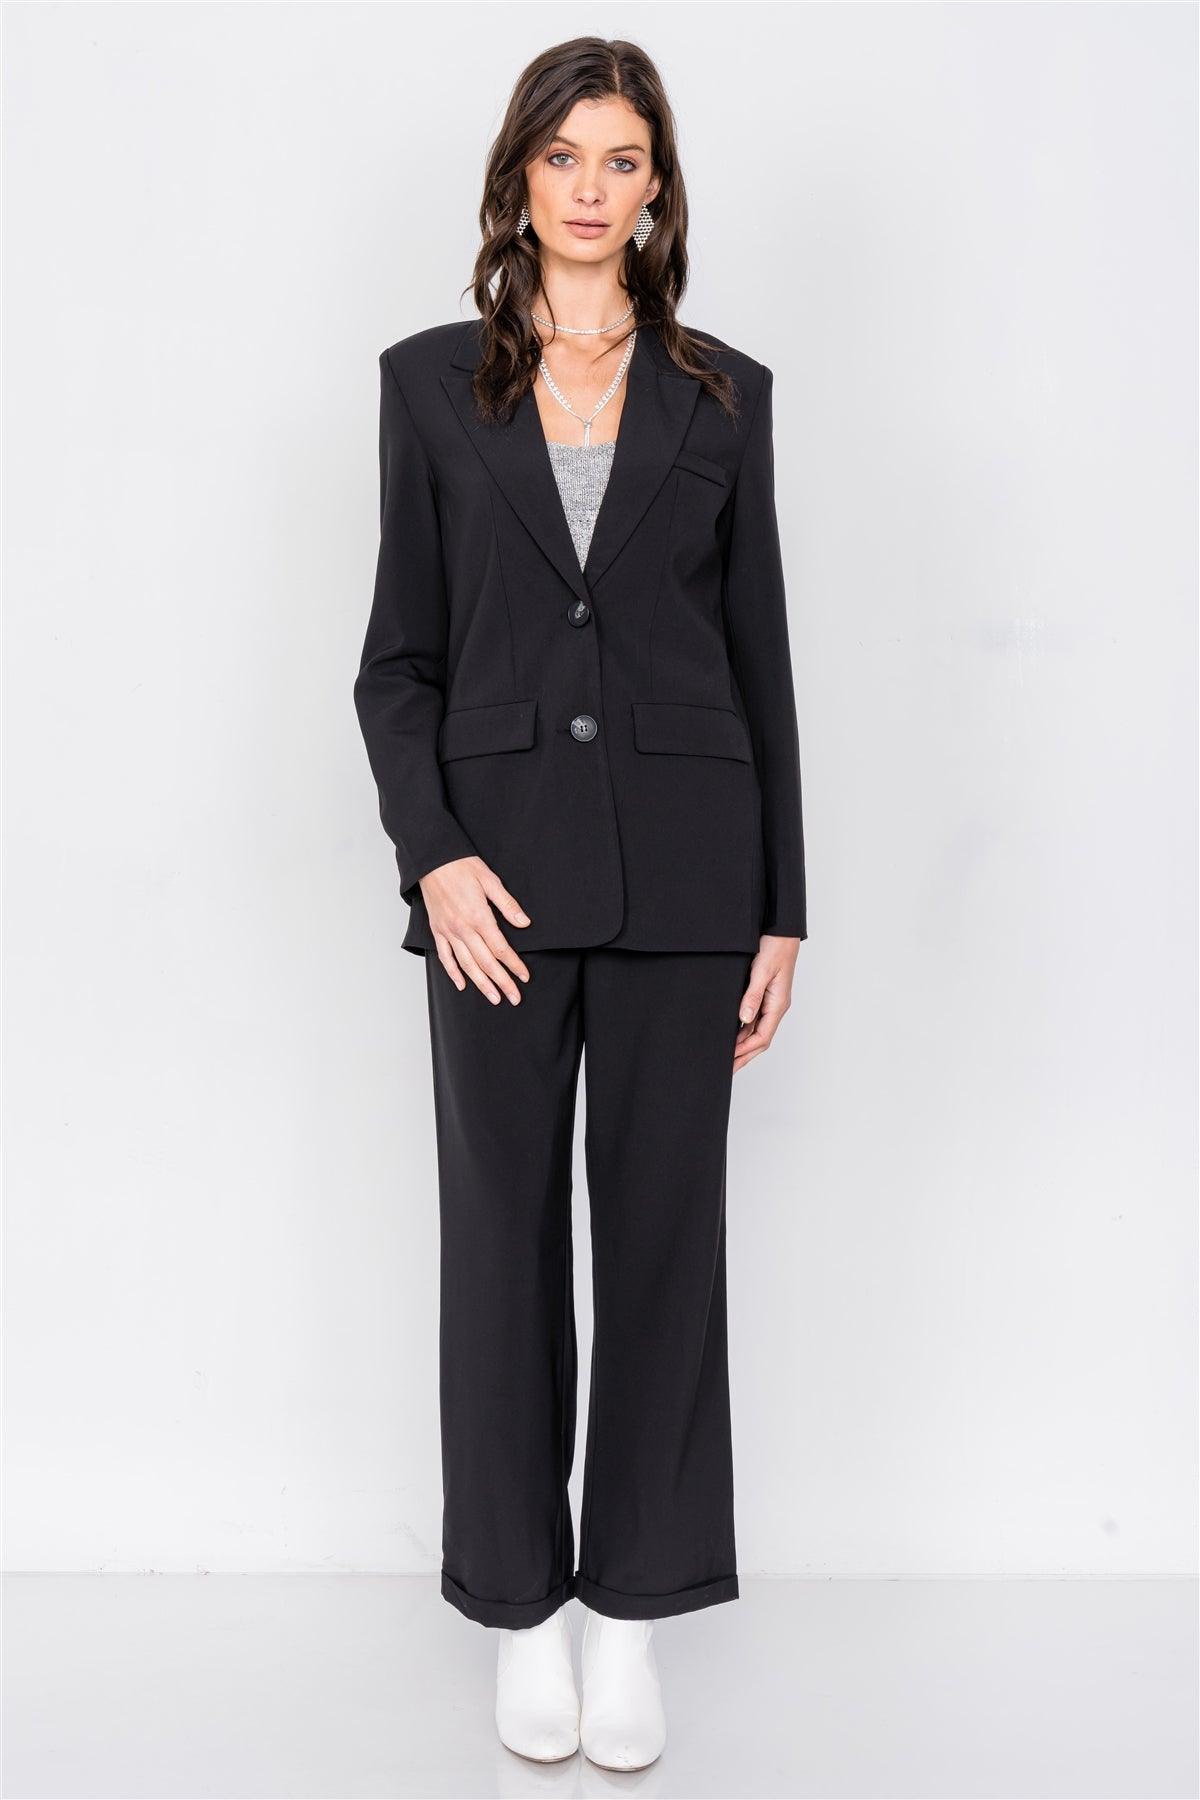 Black Fitted Blazer Office Chic High-Waist Ankle Pant Set /2-1-1